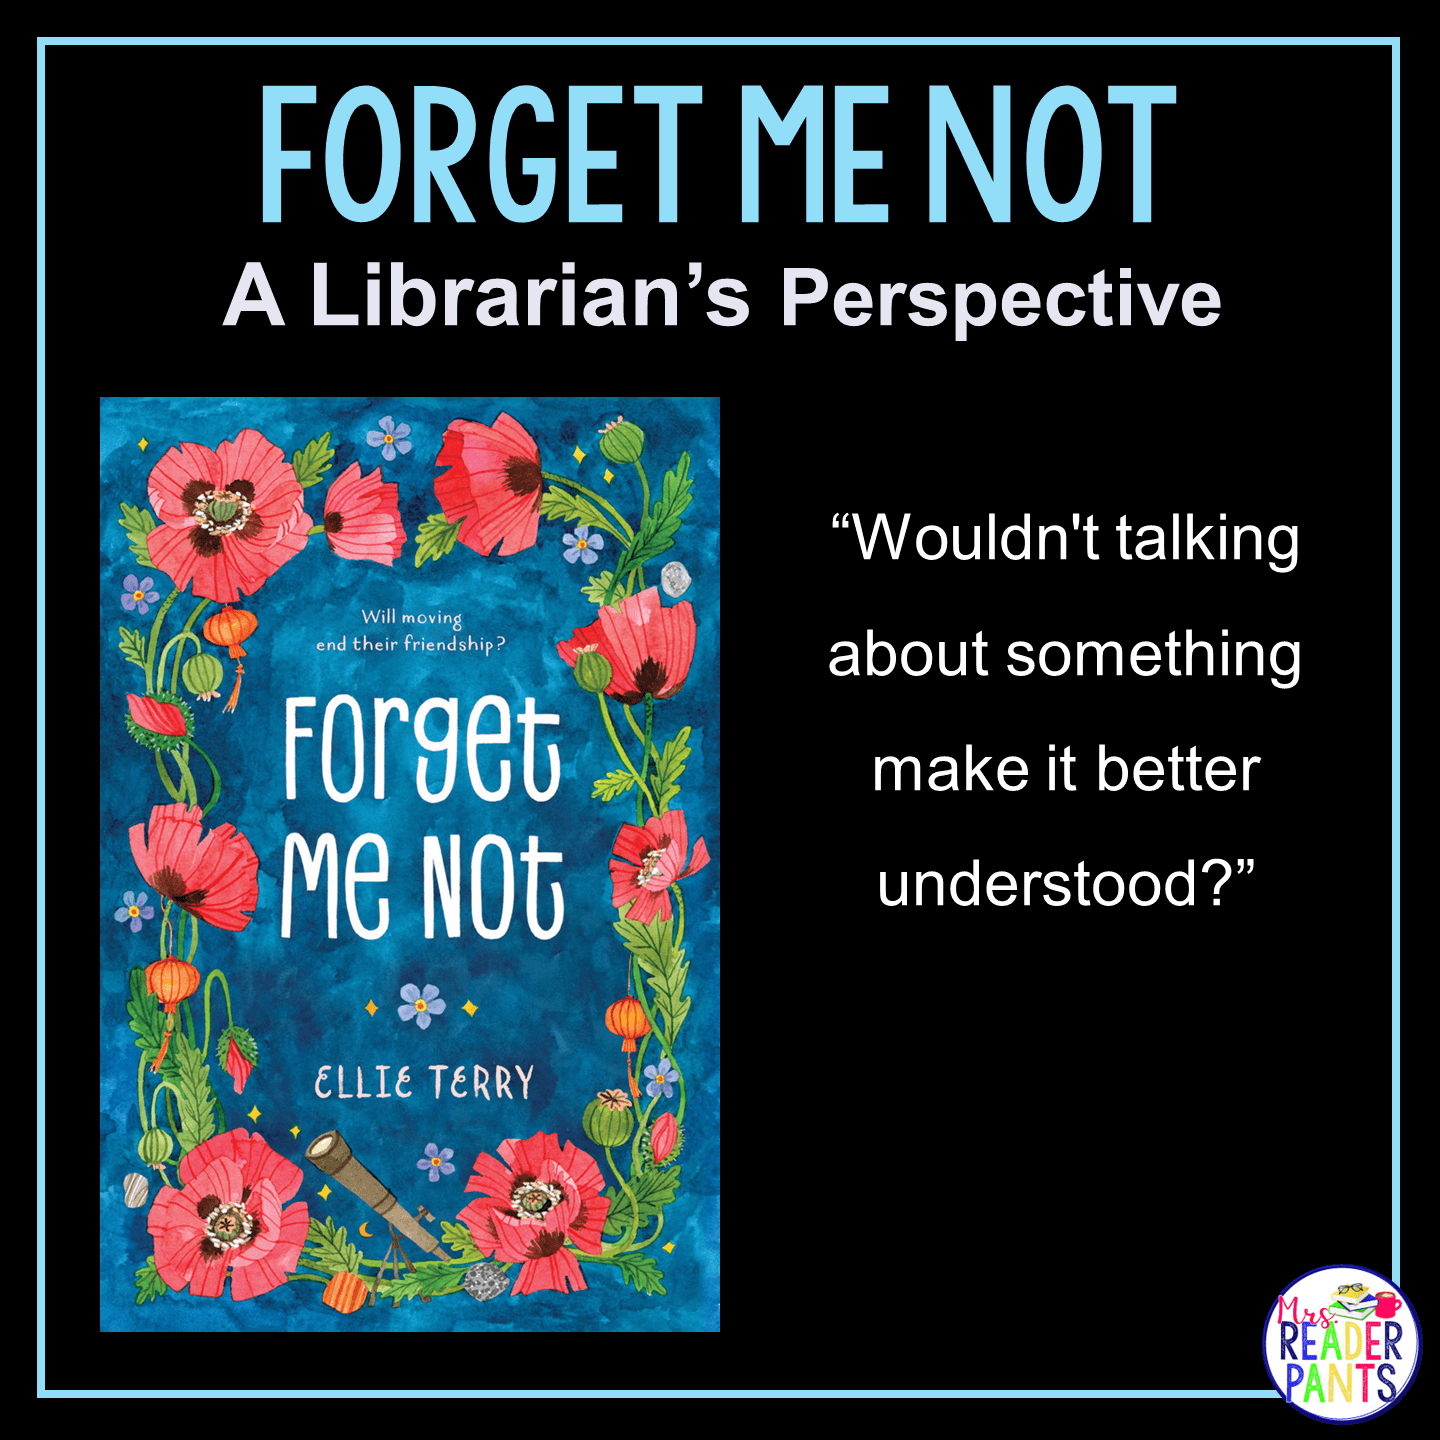 This is a librarian's review of Forget Me Not by Ellie Terry.